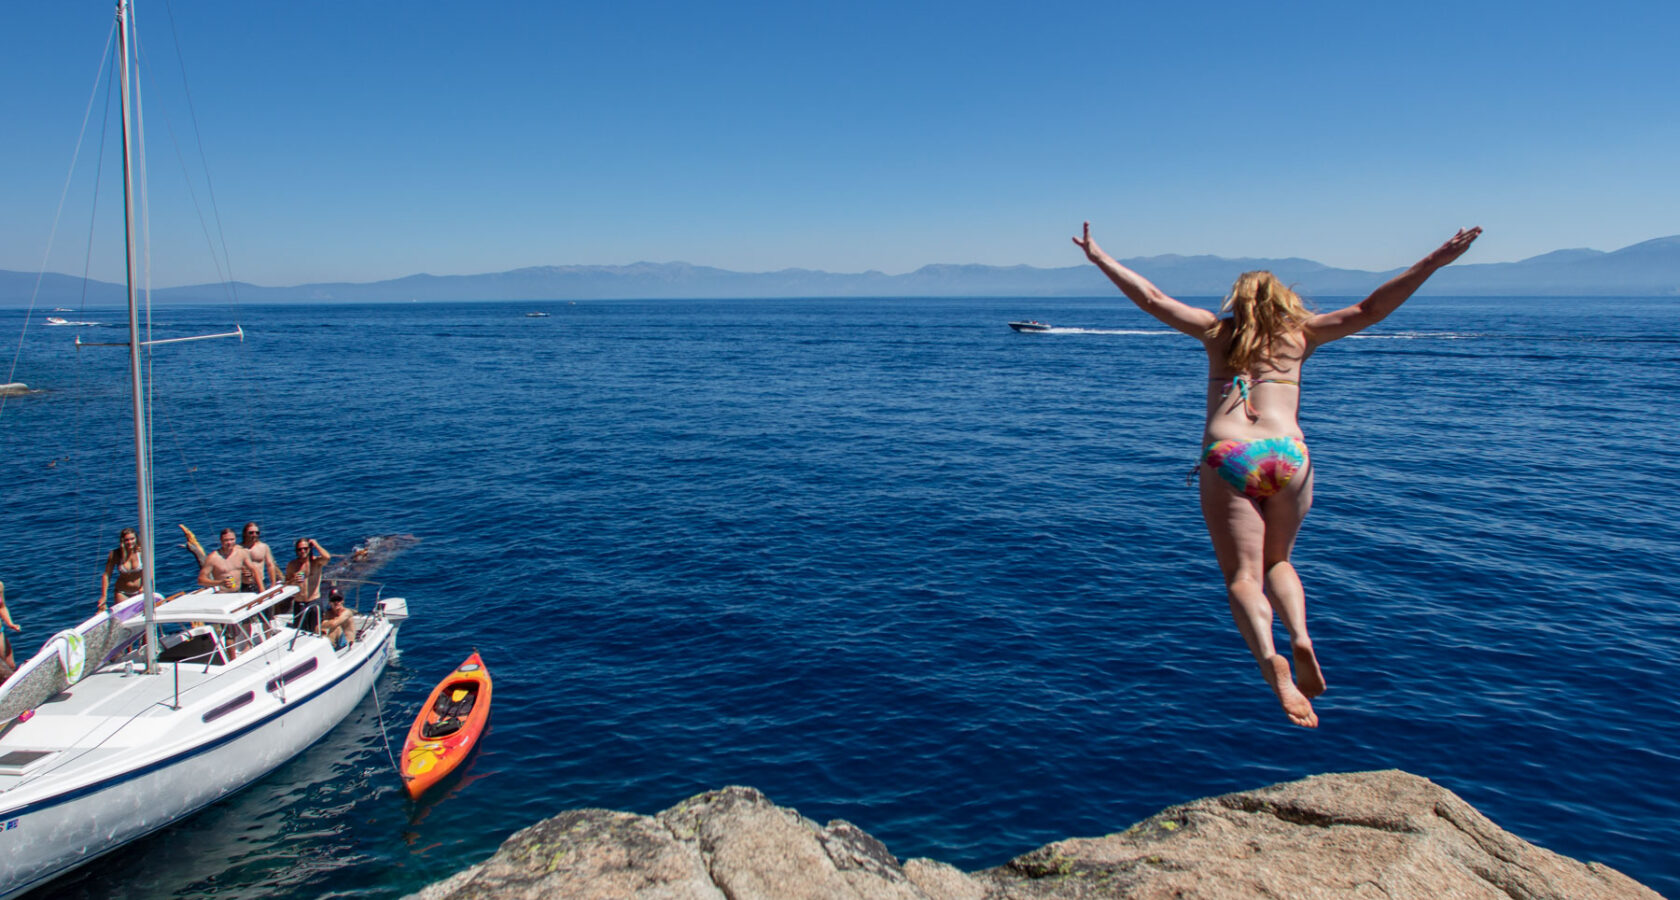 Any Lake Tahoe itinerary should include a jump in the lake